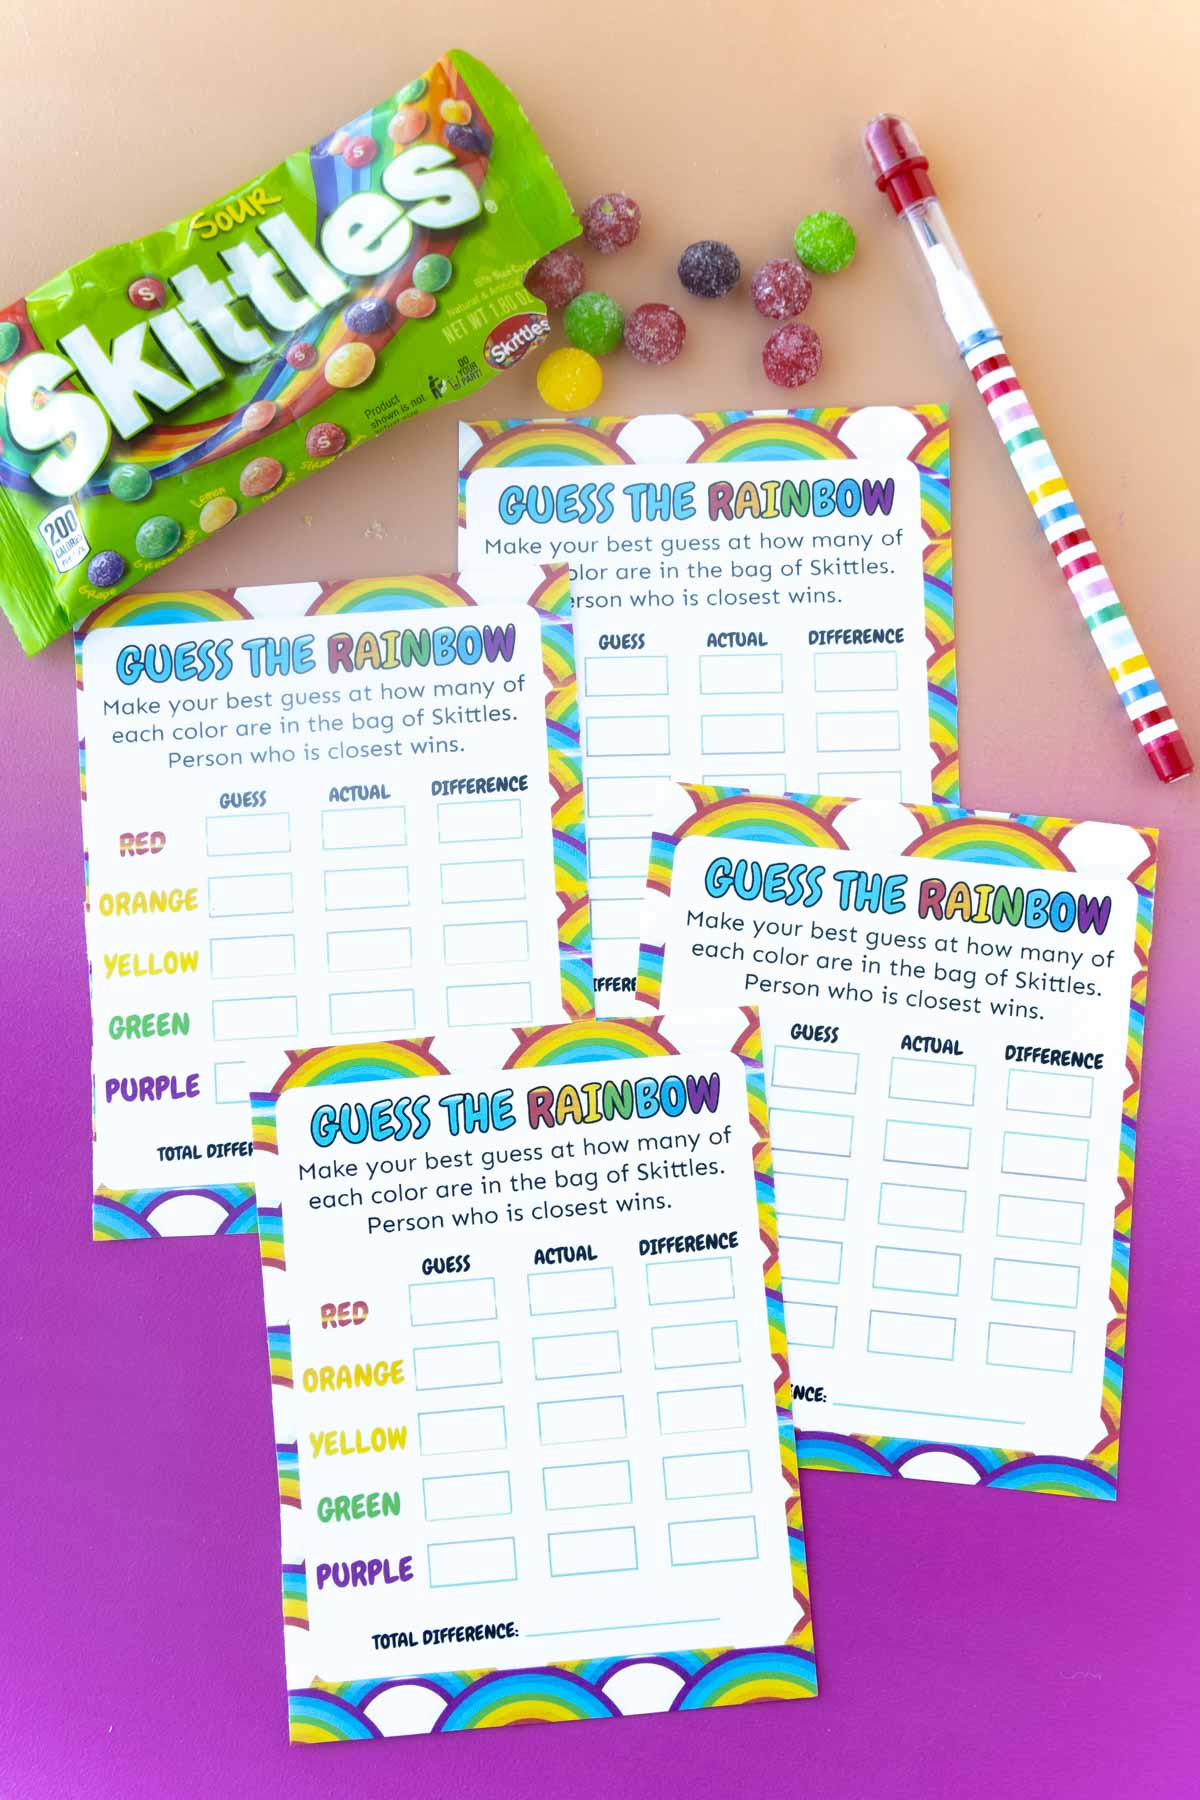 Classroom Office Party Game For Kids & Adults Valentine Day 8 Trivia Emoji Game Set Bundle Printable Or Virtual Instant Download Activity